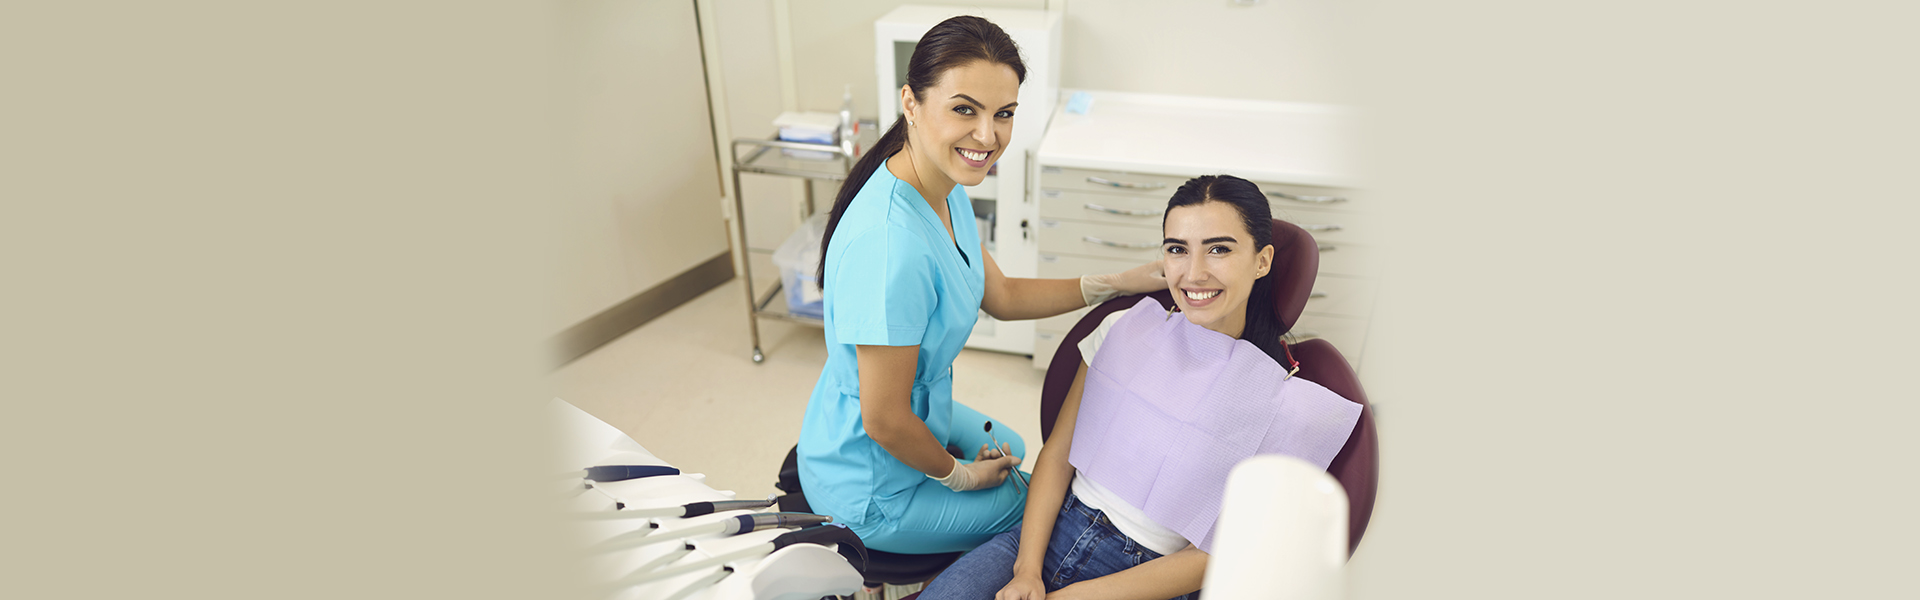 Easy Ways To Maintain Your Dental Health Between Checkups